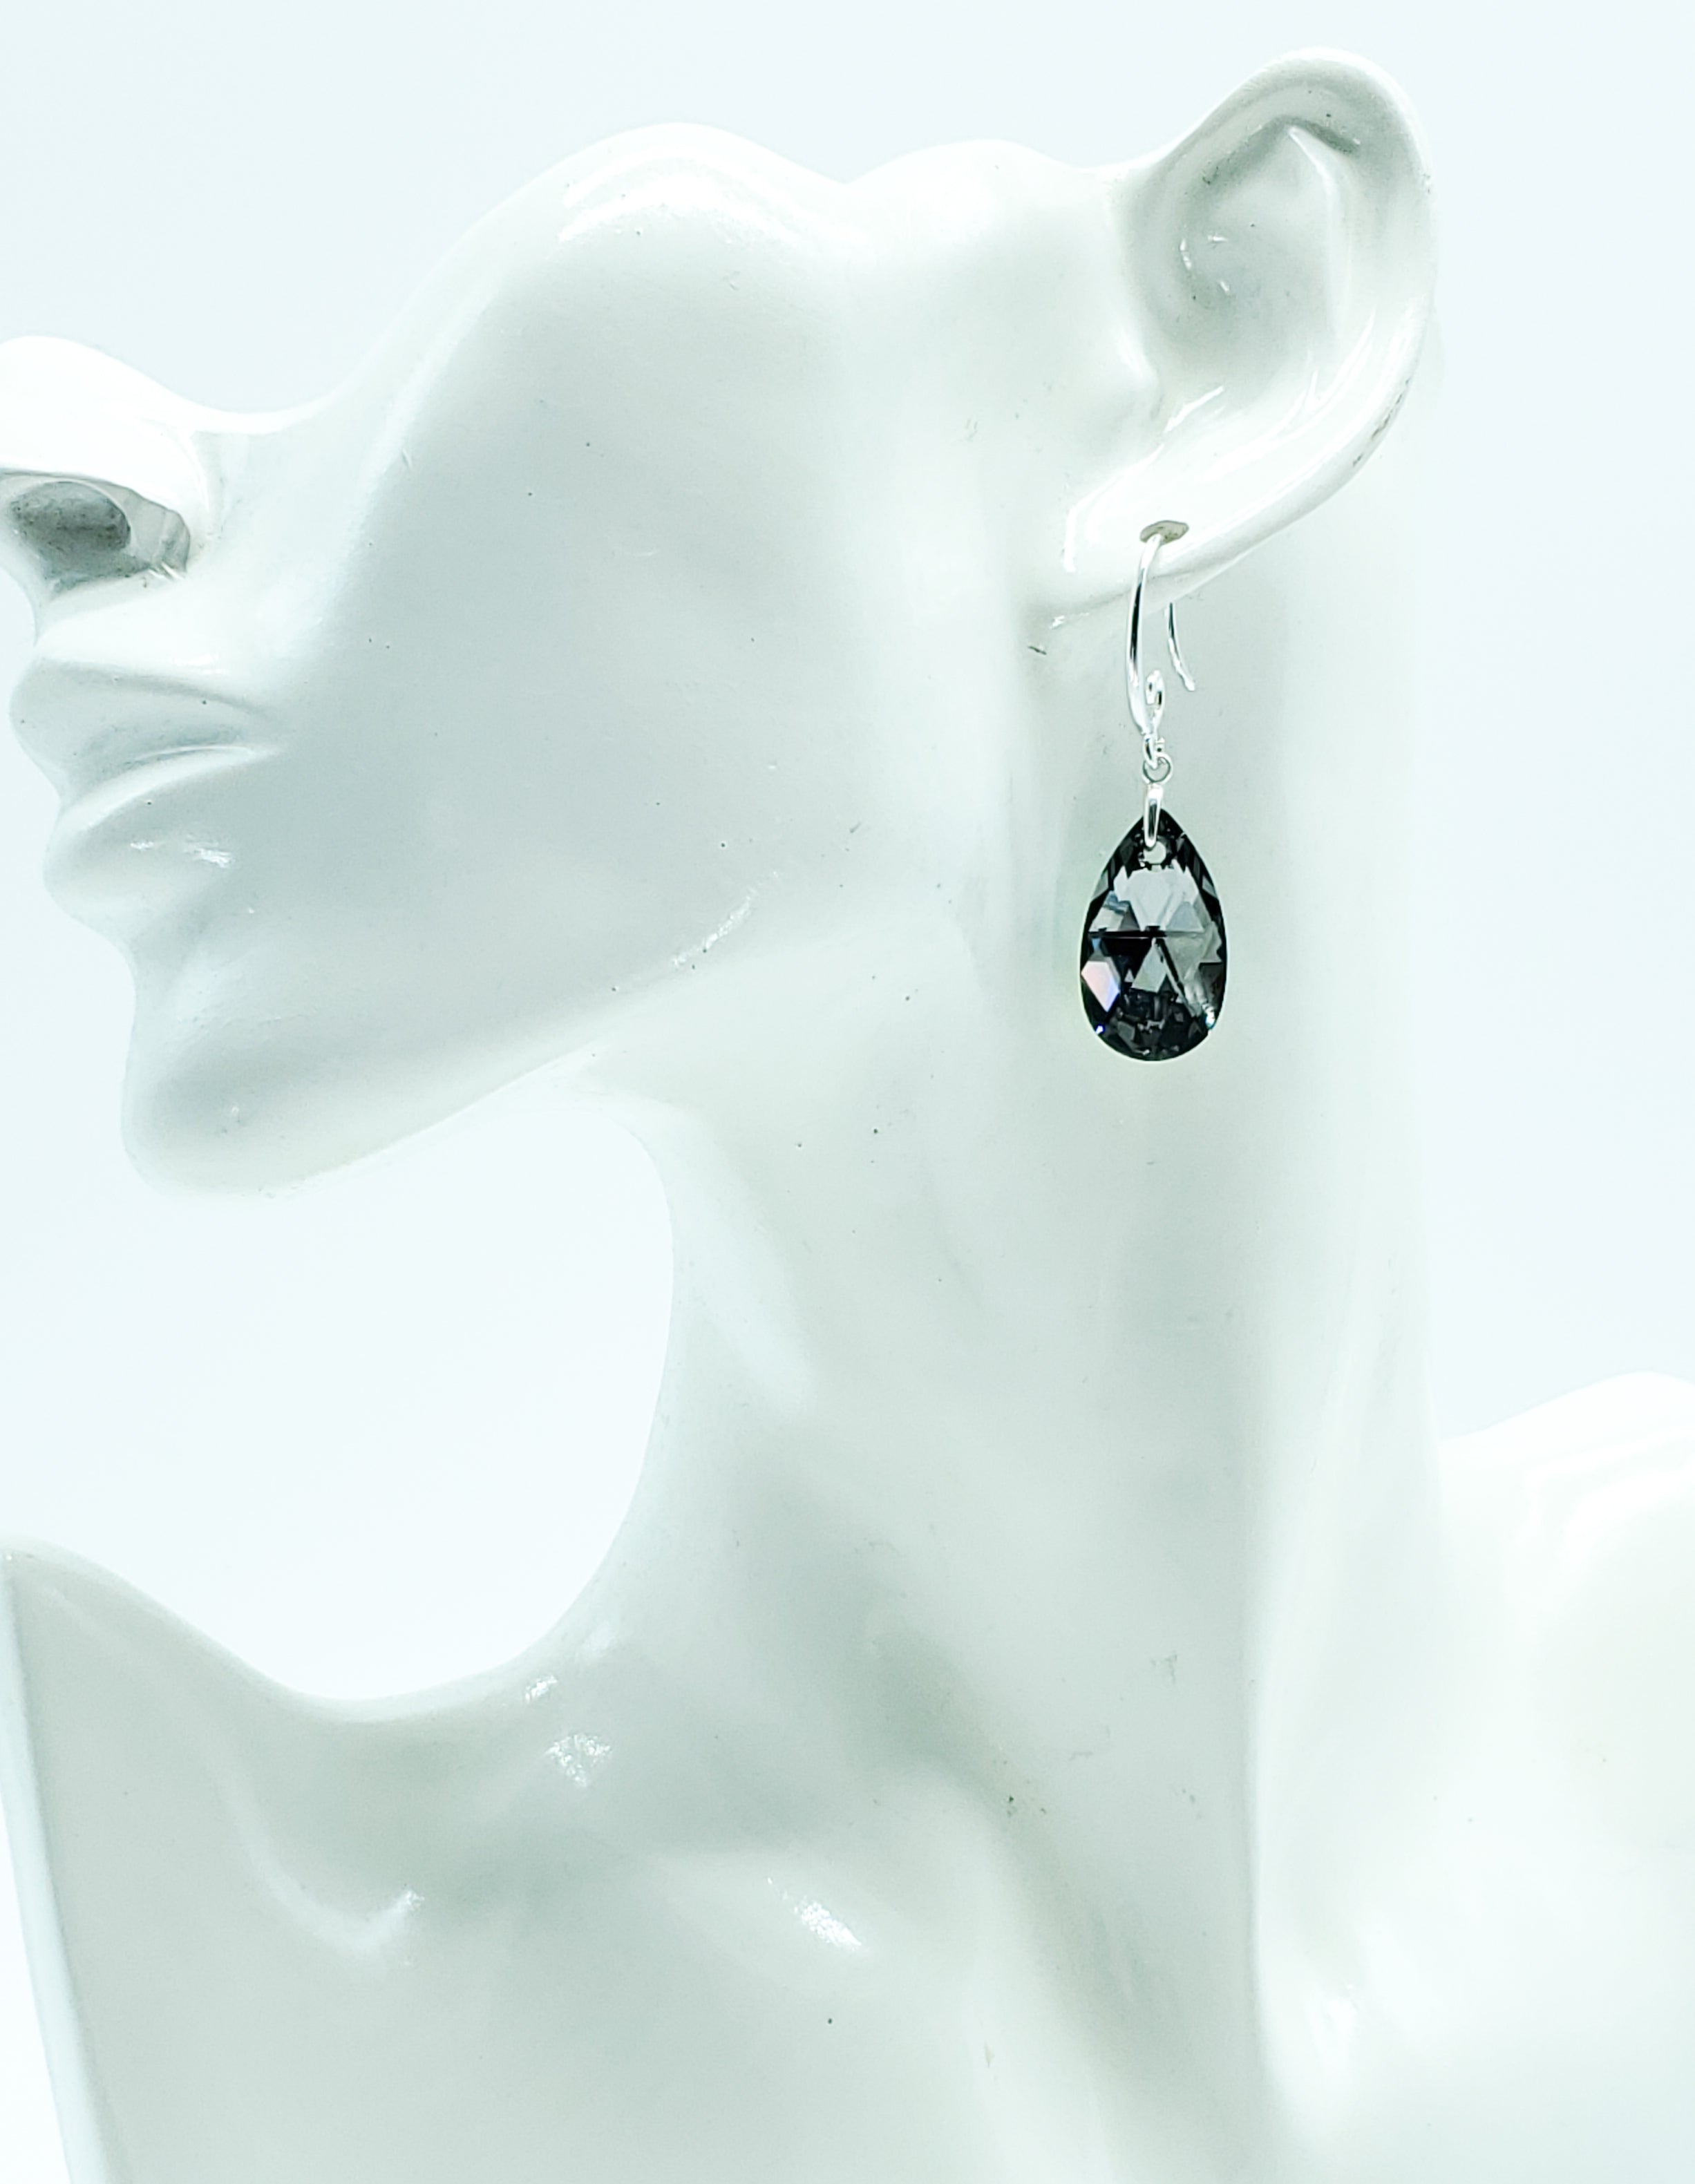 "Crystal Silver Night" Swarovski Crystal Earrings on Sterling Silver - The Caffeinated Raven